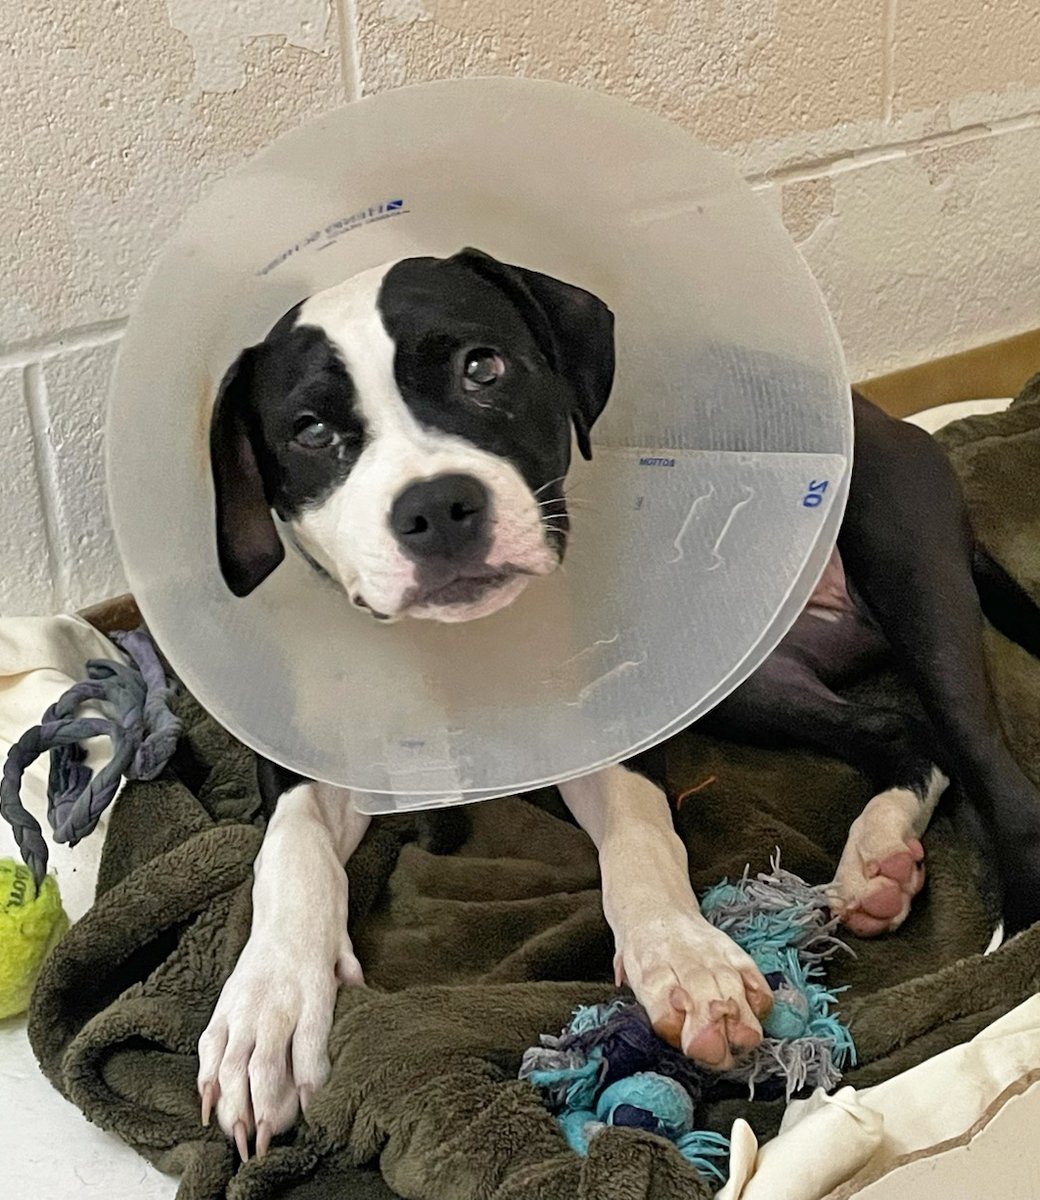 5-month-old Tessa's vet exam shocked us — someone held her head under their shoe as they shot a bullet into her leg. Now we need your help to provide the surgery this sweet puppy needs. Please consider helping with a donation: spcawake.org/give #spcawake #animawelfare